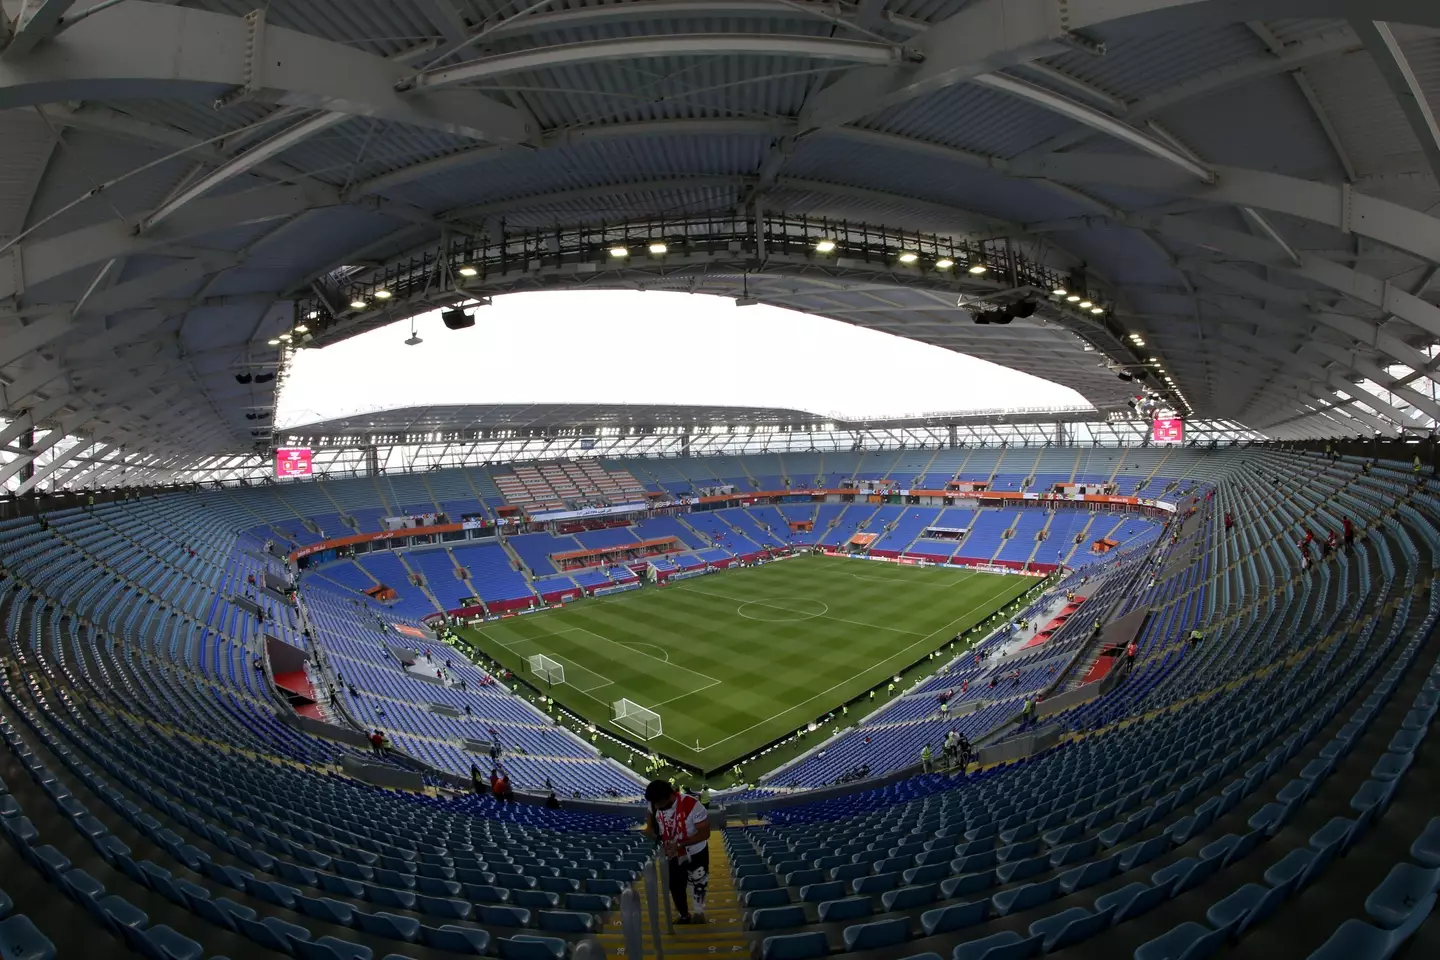 The stadium will host 40,00 fans during the tournament.